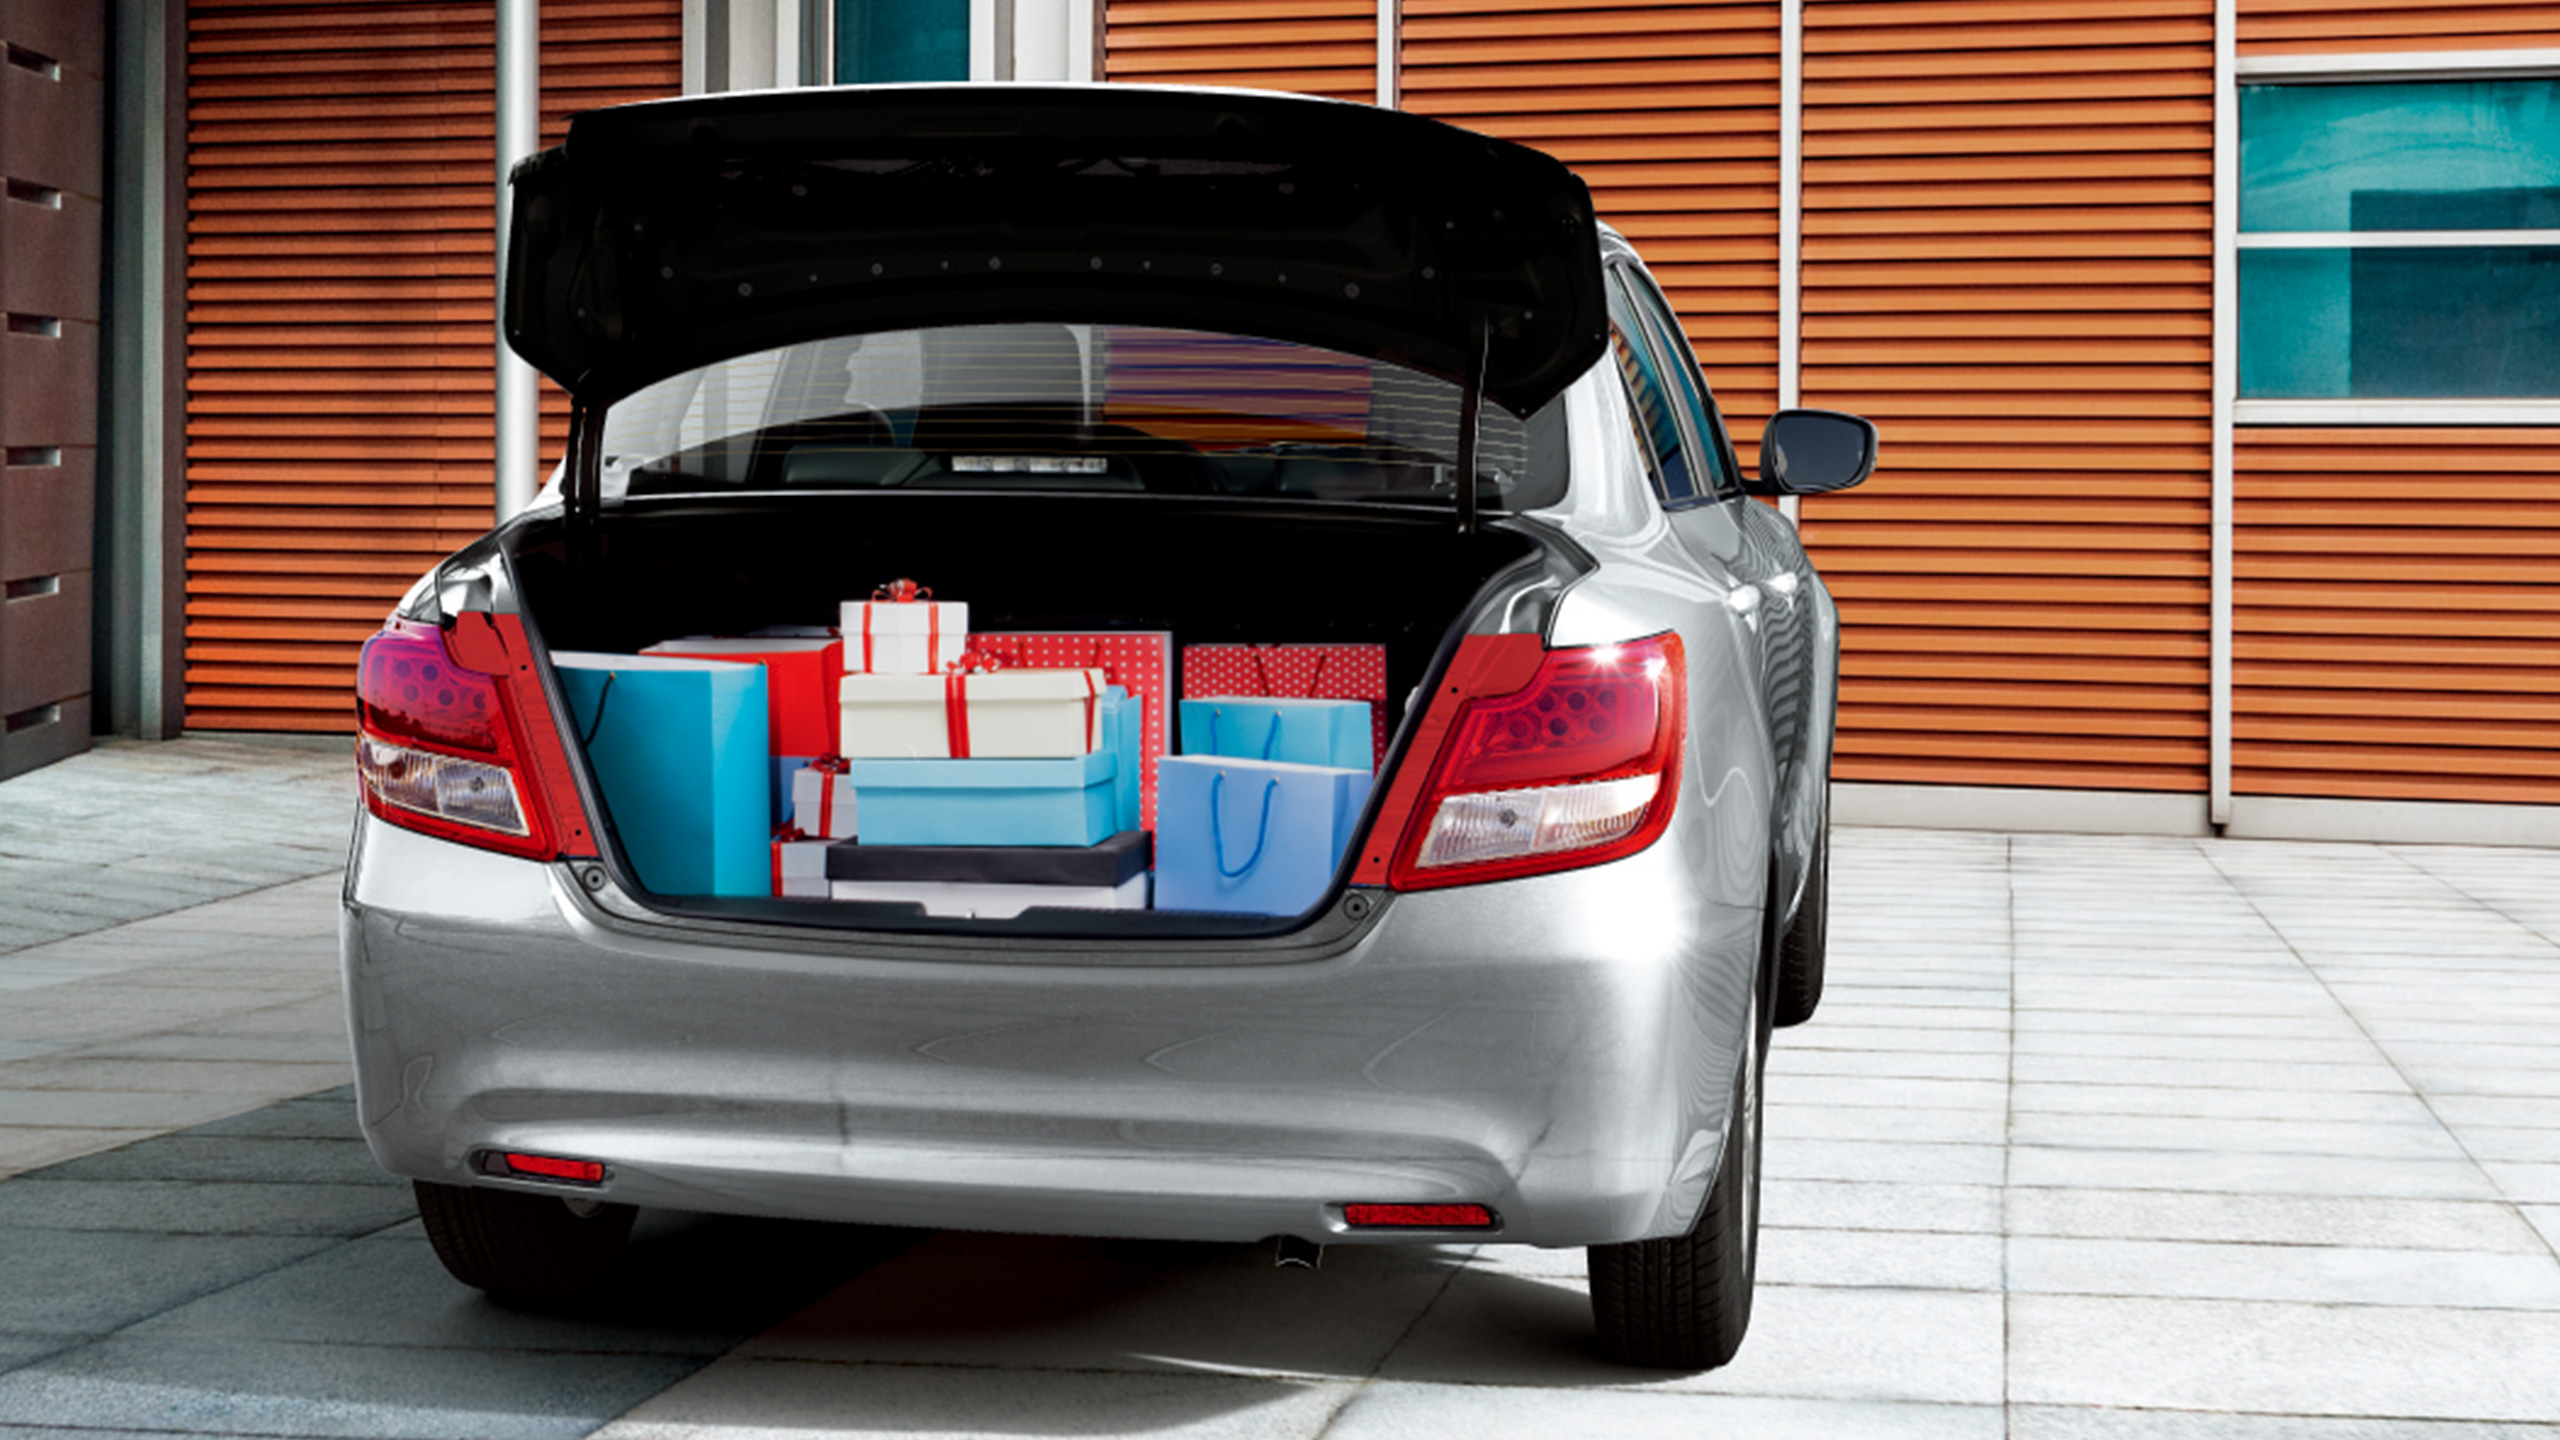 Dzire-rear-shot-with-many-gifts-in-the-boot-space